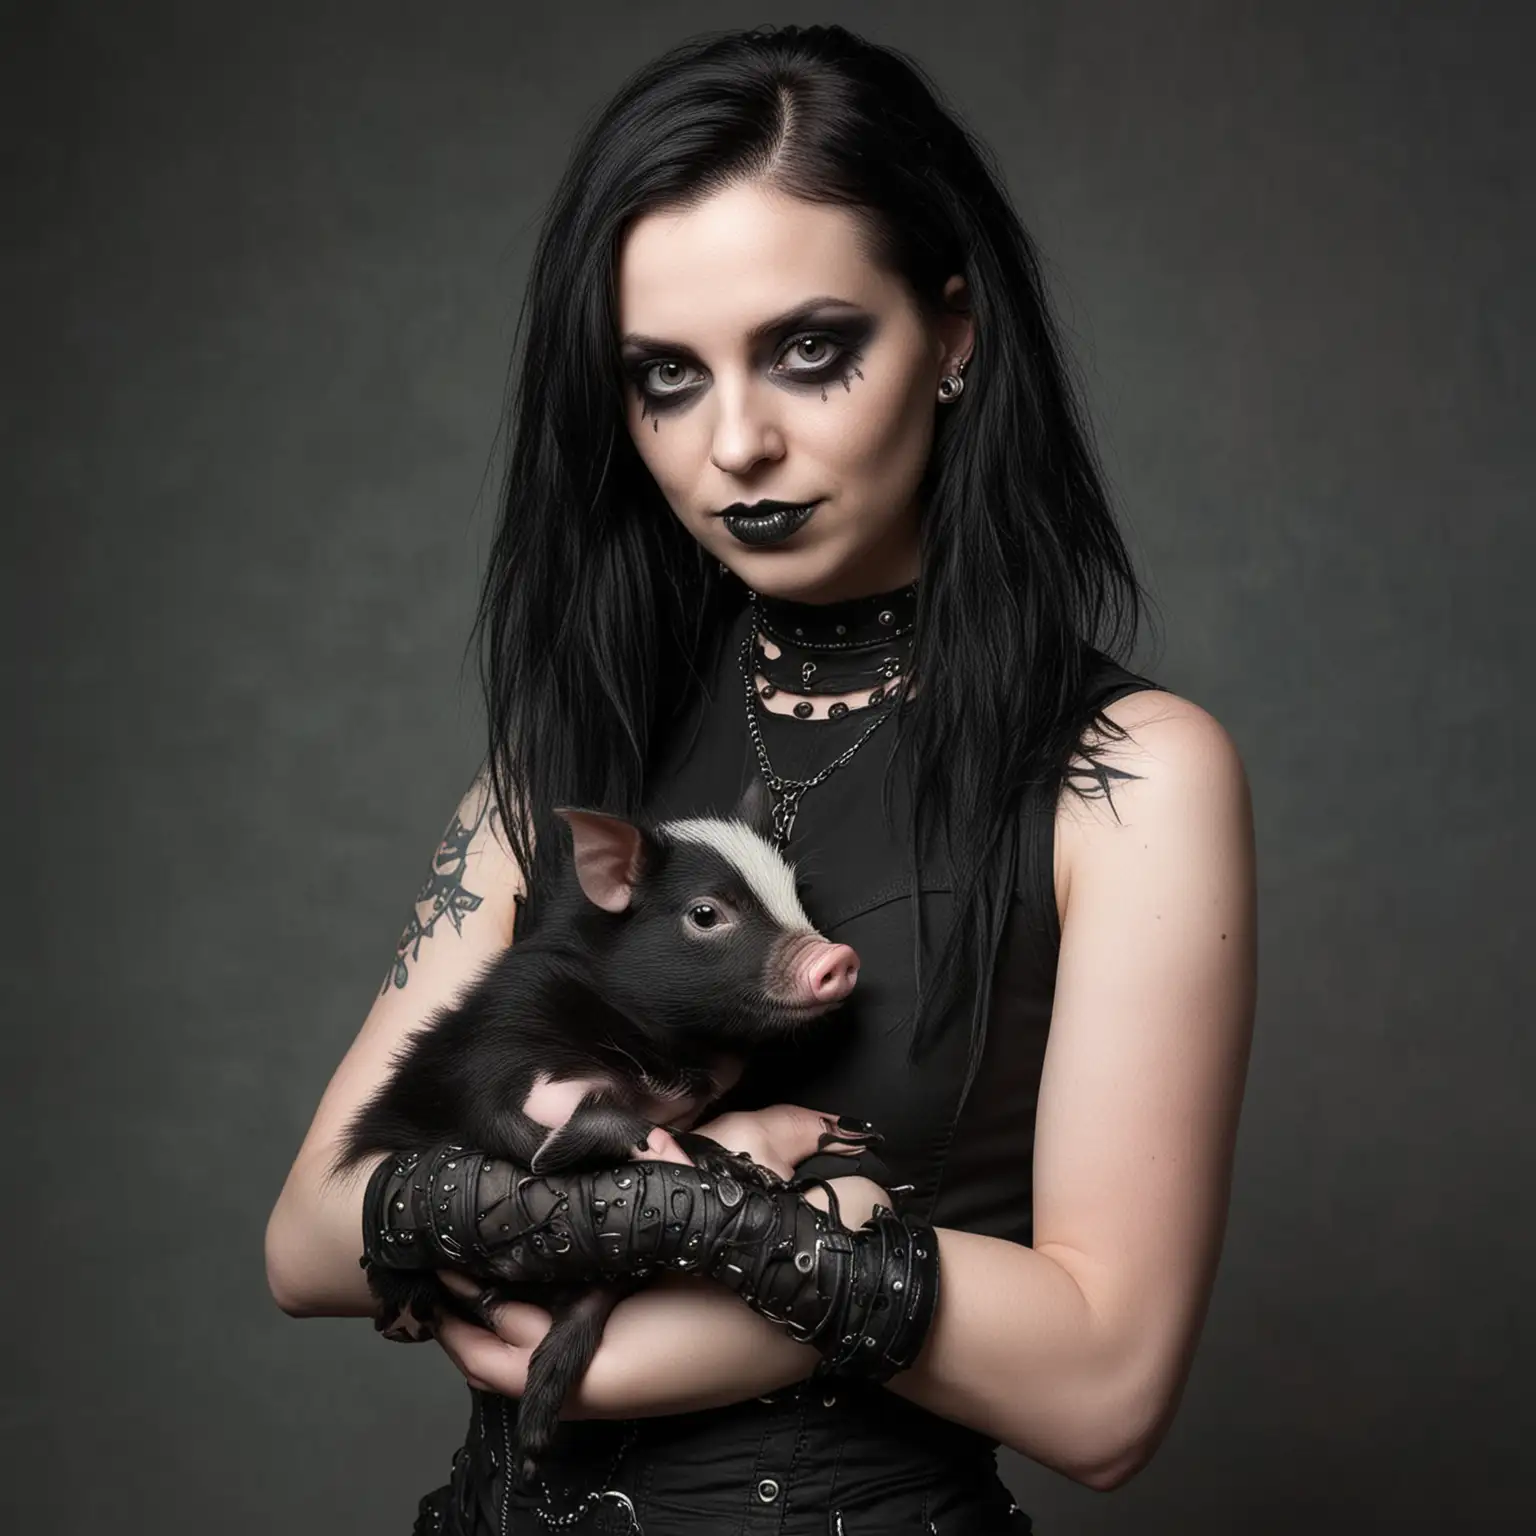 Goth Woman Tenderly Holding a Baby Pig